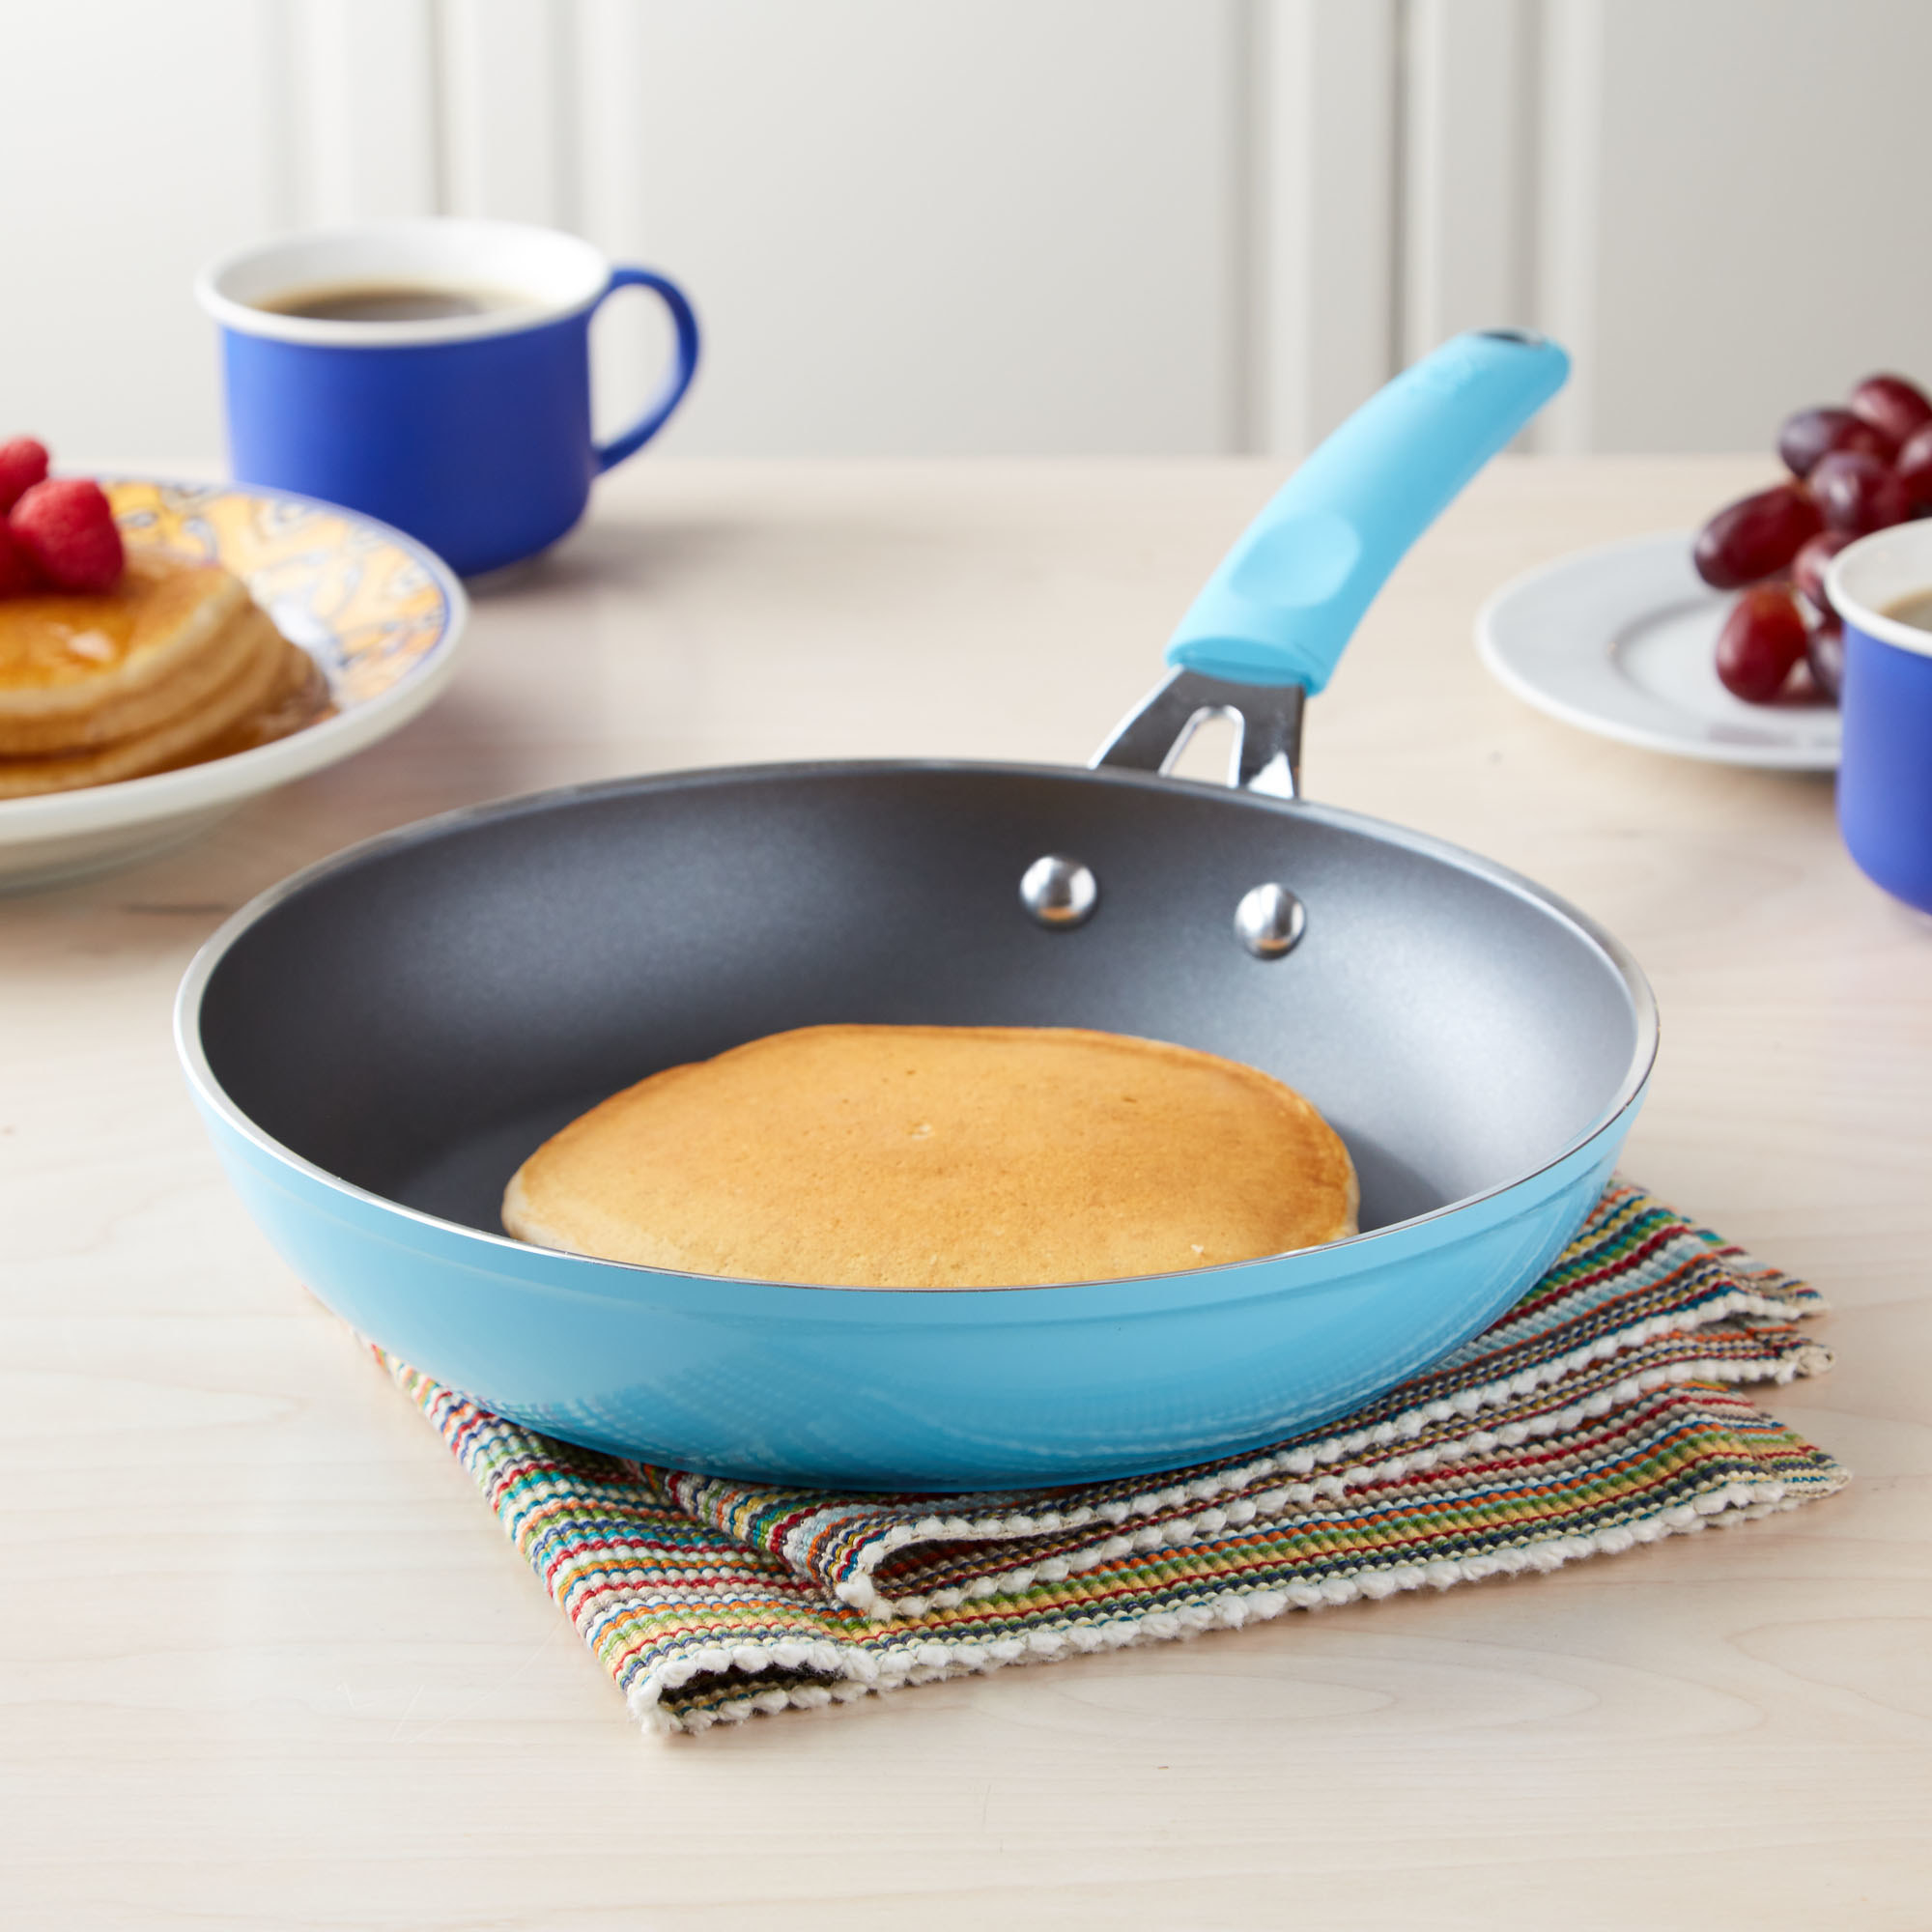 A blue skillet with a pancake in it